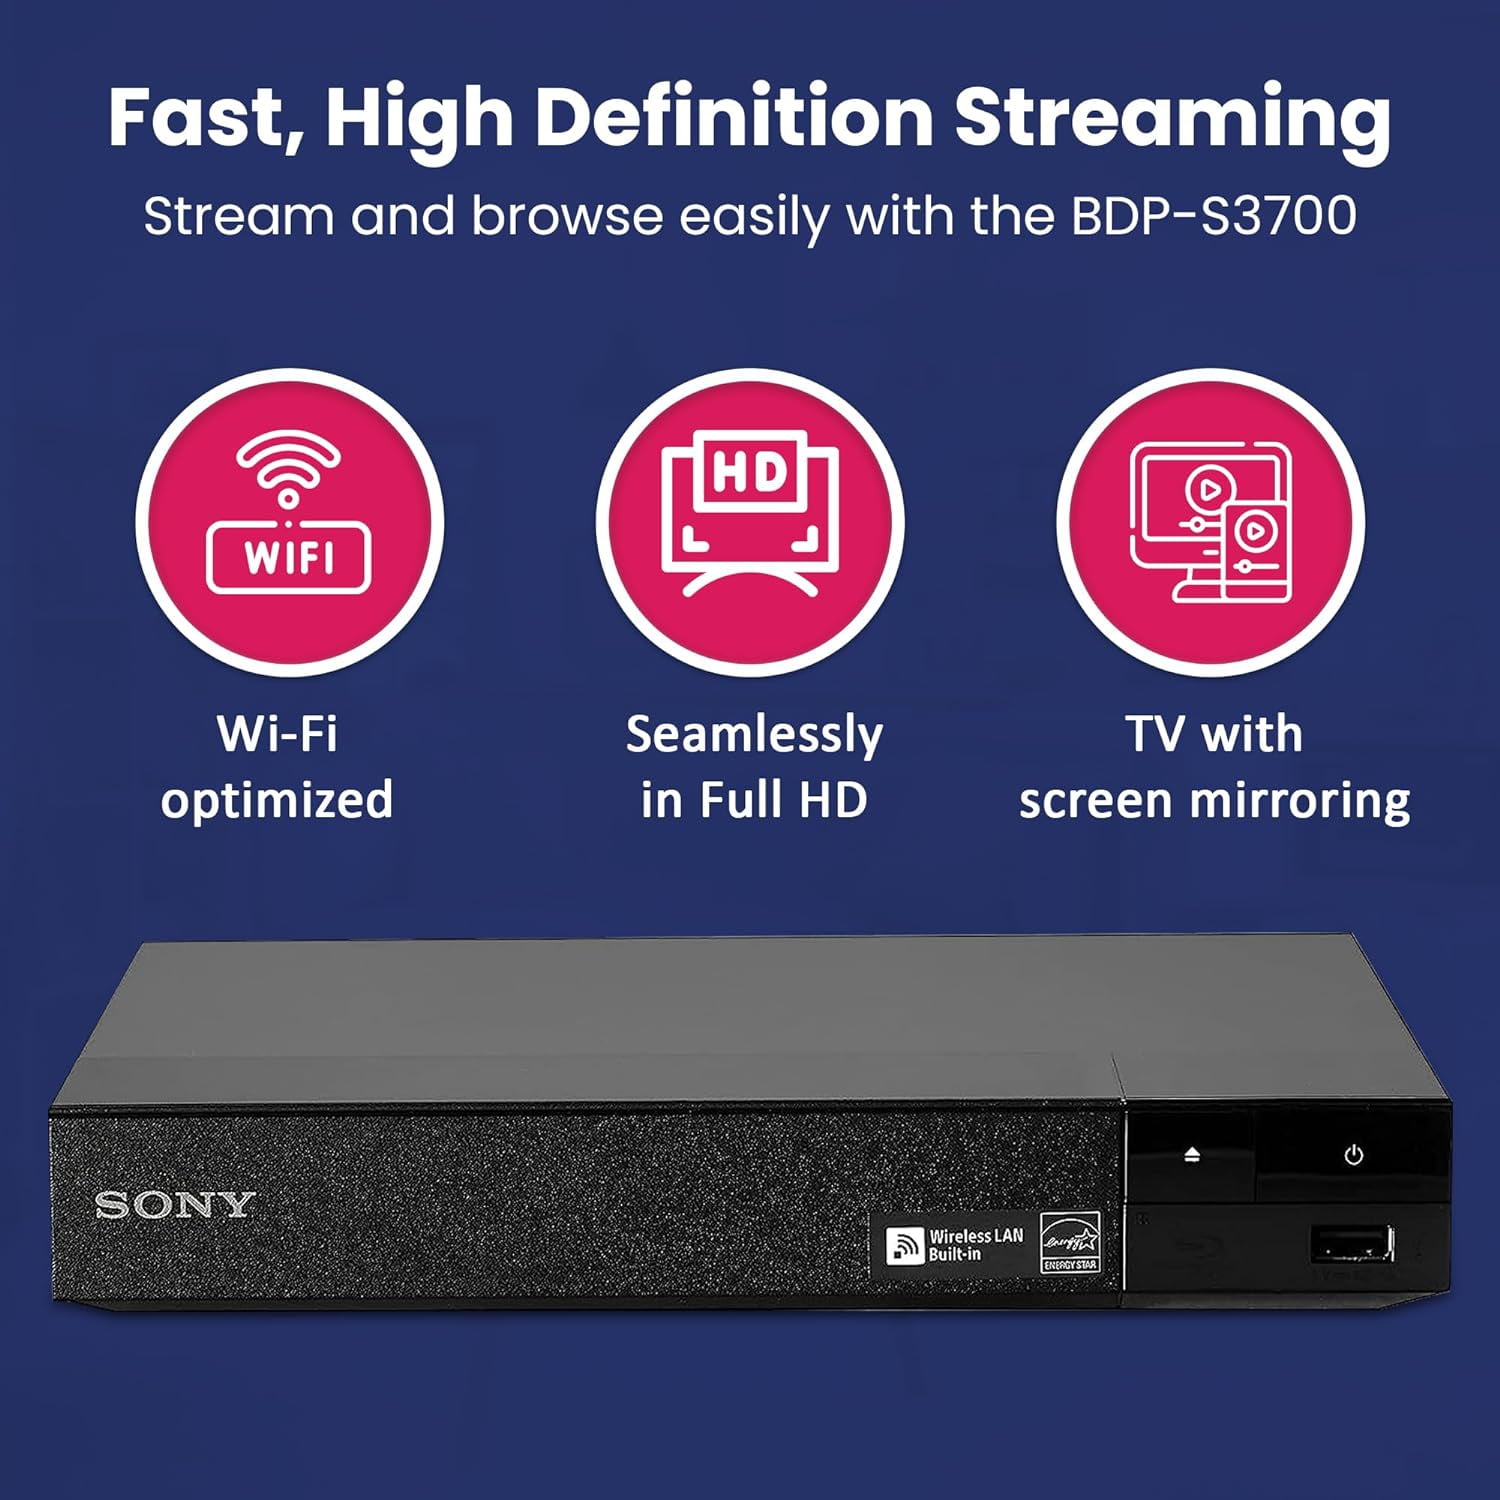 Sony BDP-S3700 Blu-Ray Disc Player + with High-Speed Cable Tube Lens NeeGo HDMI You + Cleaner - Control W/Ethernet Remote Wi-Fi Built-in Netflix, NeeGo